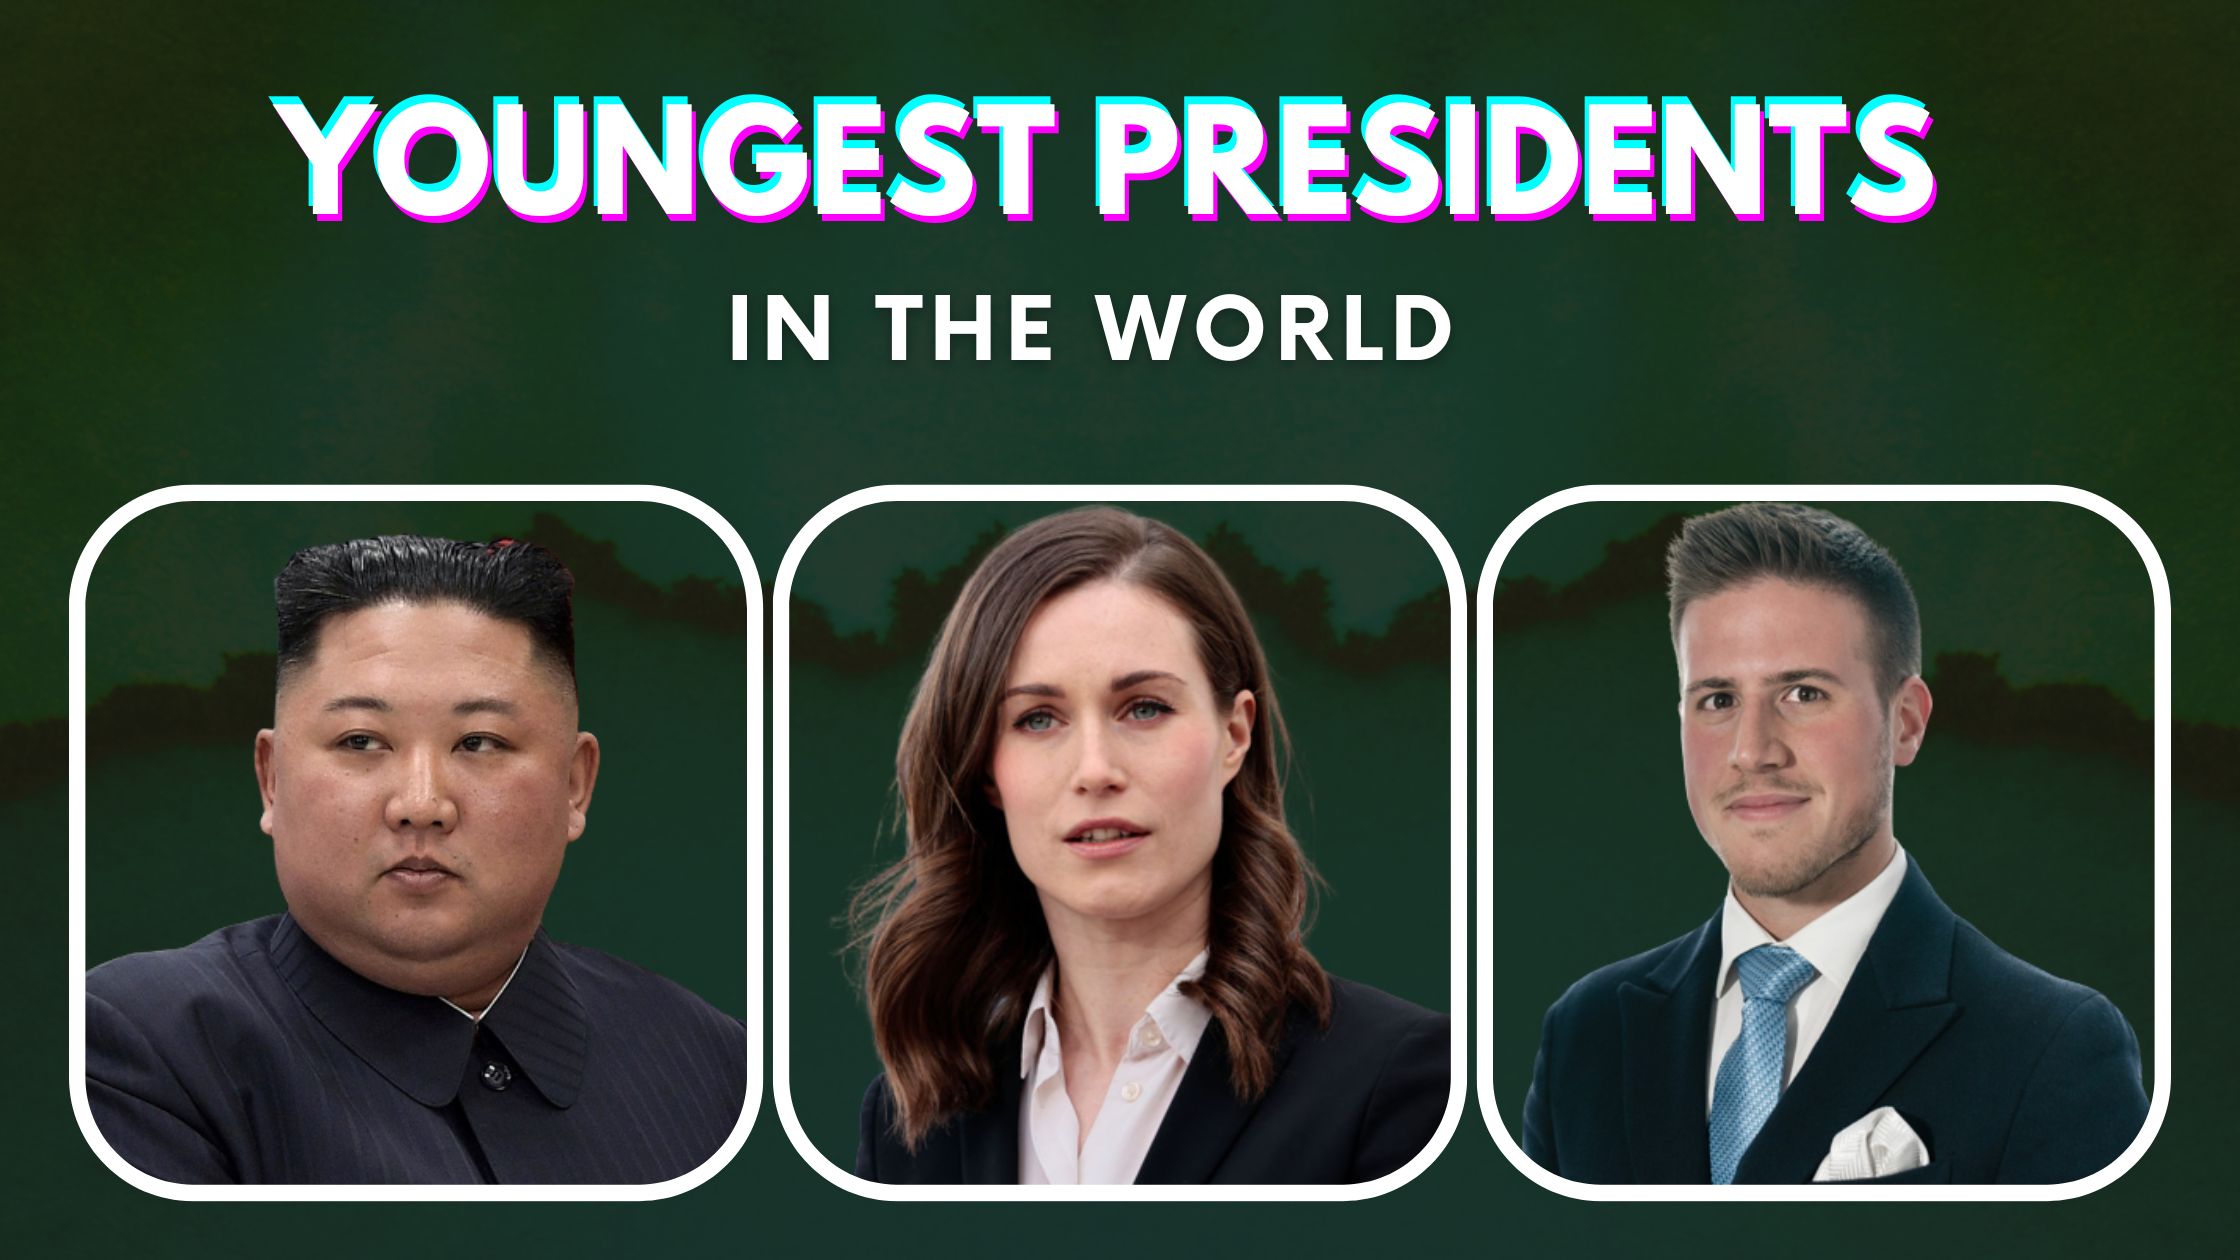 Top 10 Youngest Presidents In The World (2022)